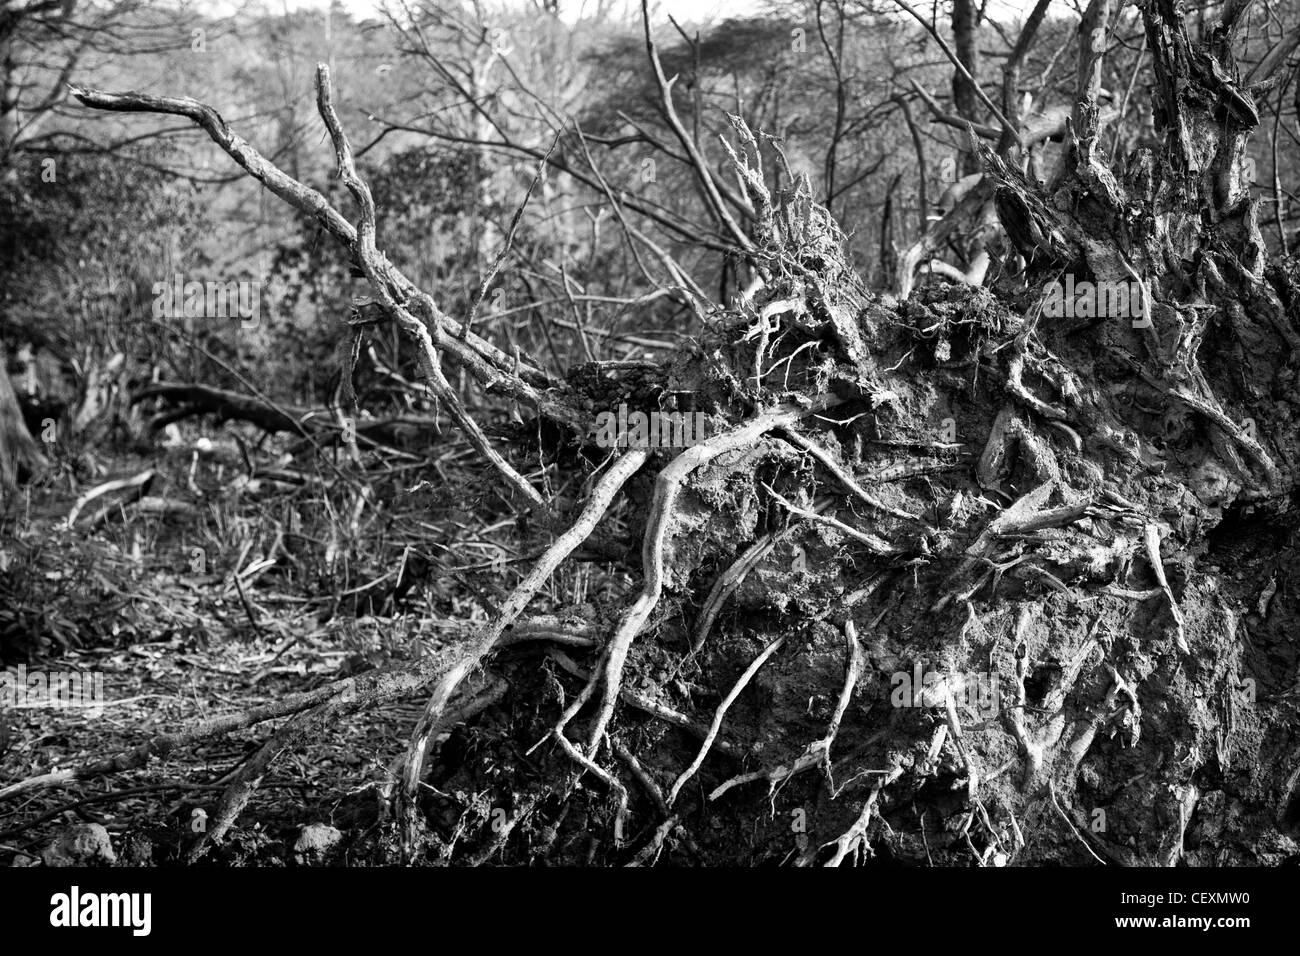 A fallen tree lies with its roots exposed, with a high contrast and detailed pattern of the roots as the focus of the image Stock Photo